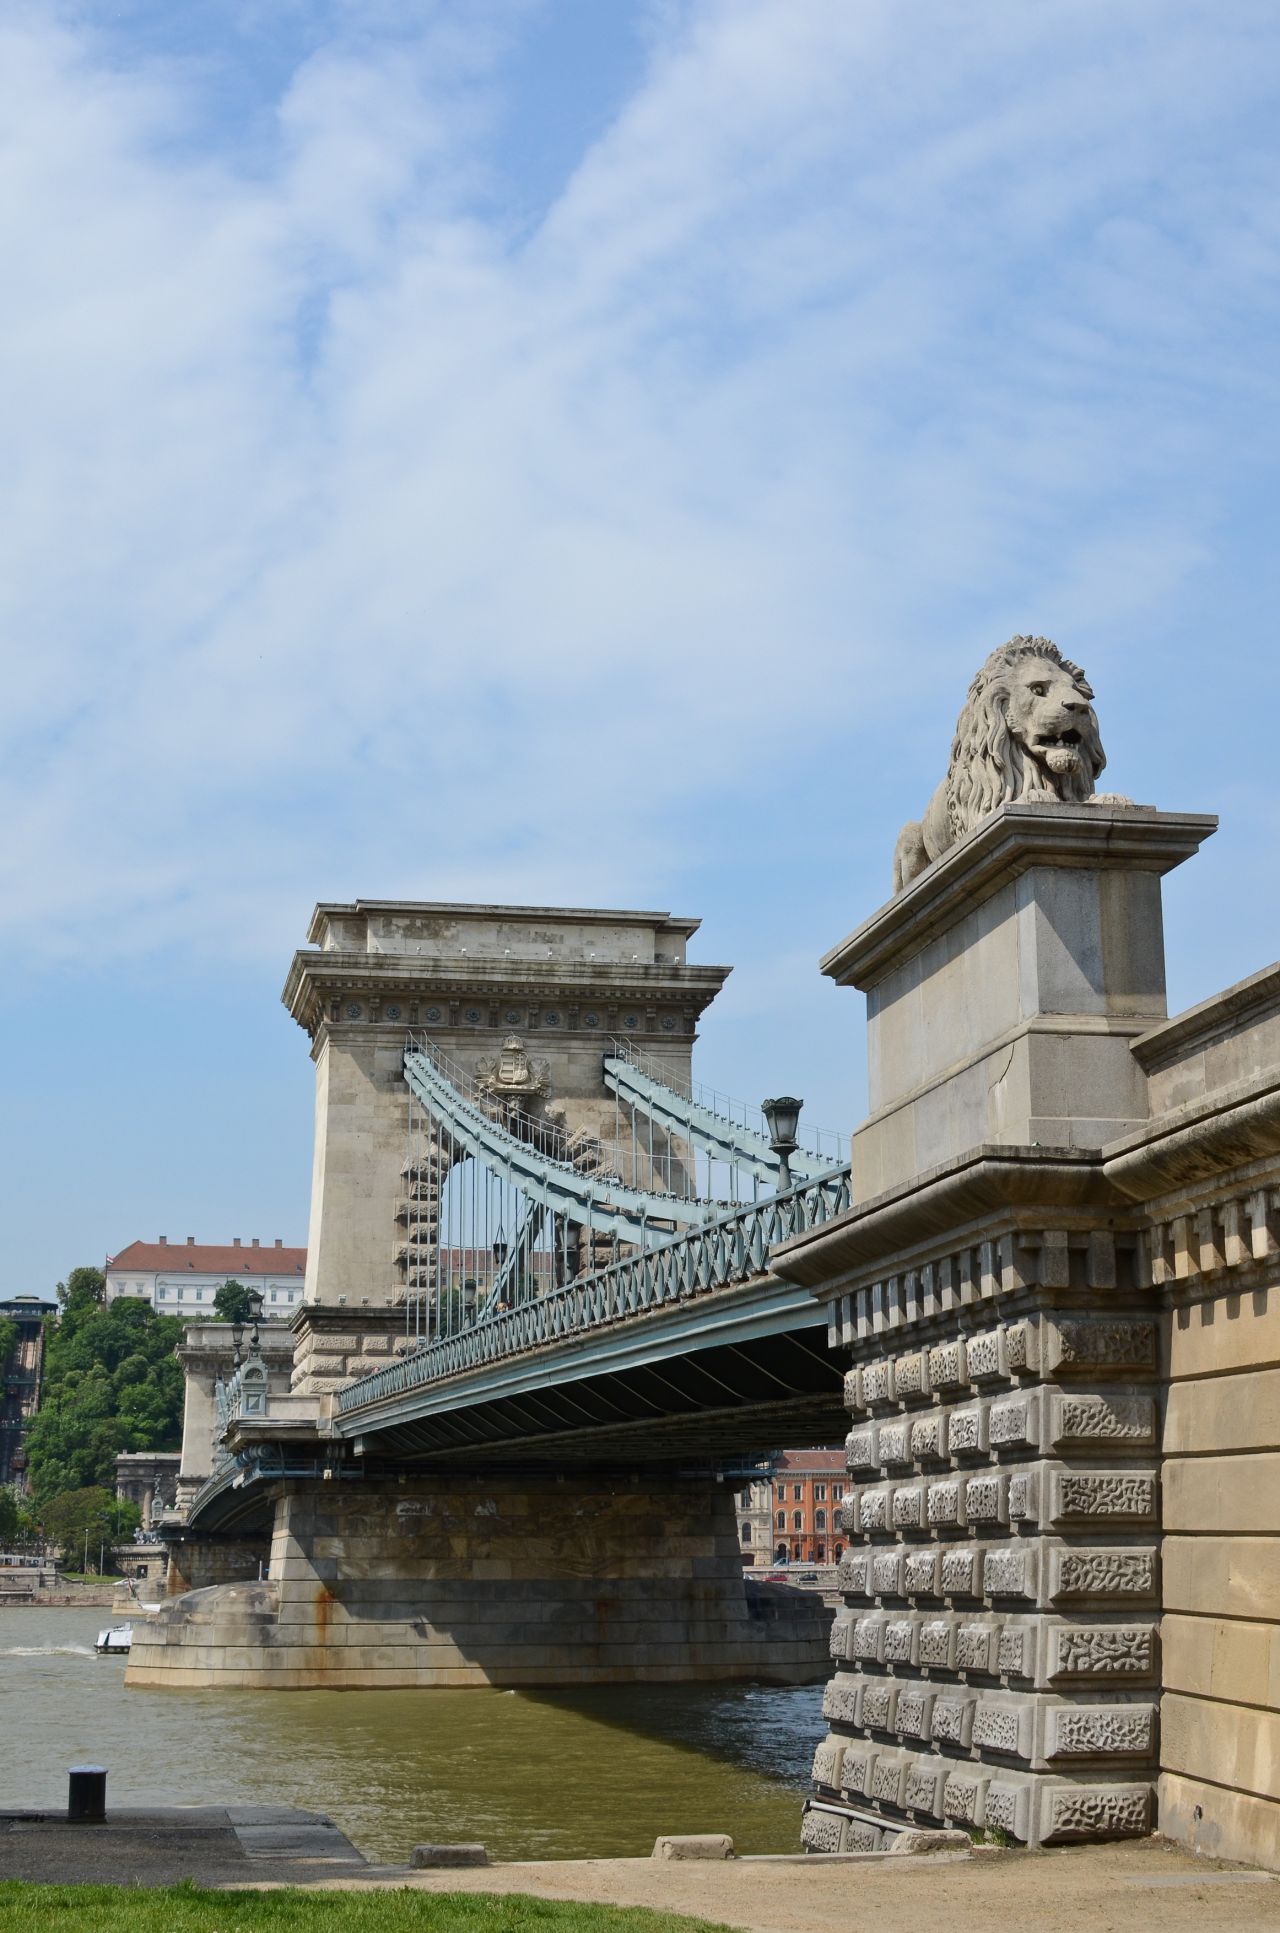 First bridge to stick Buda and Pest together permanently.